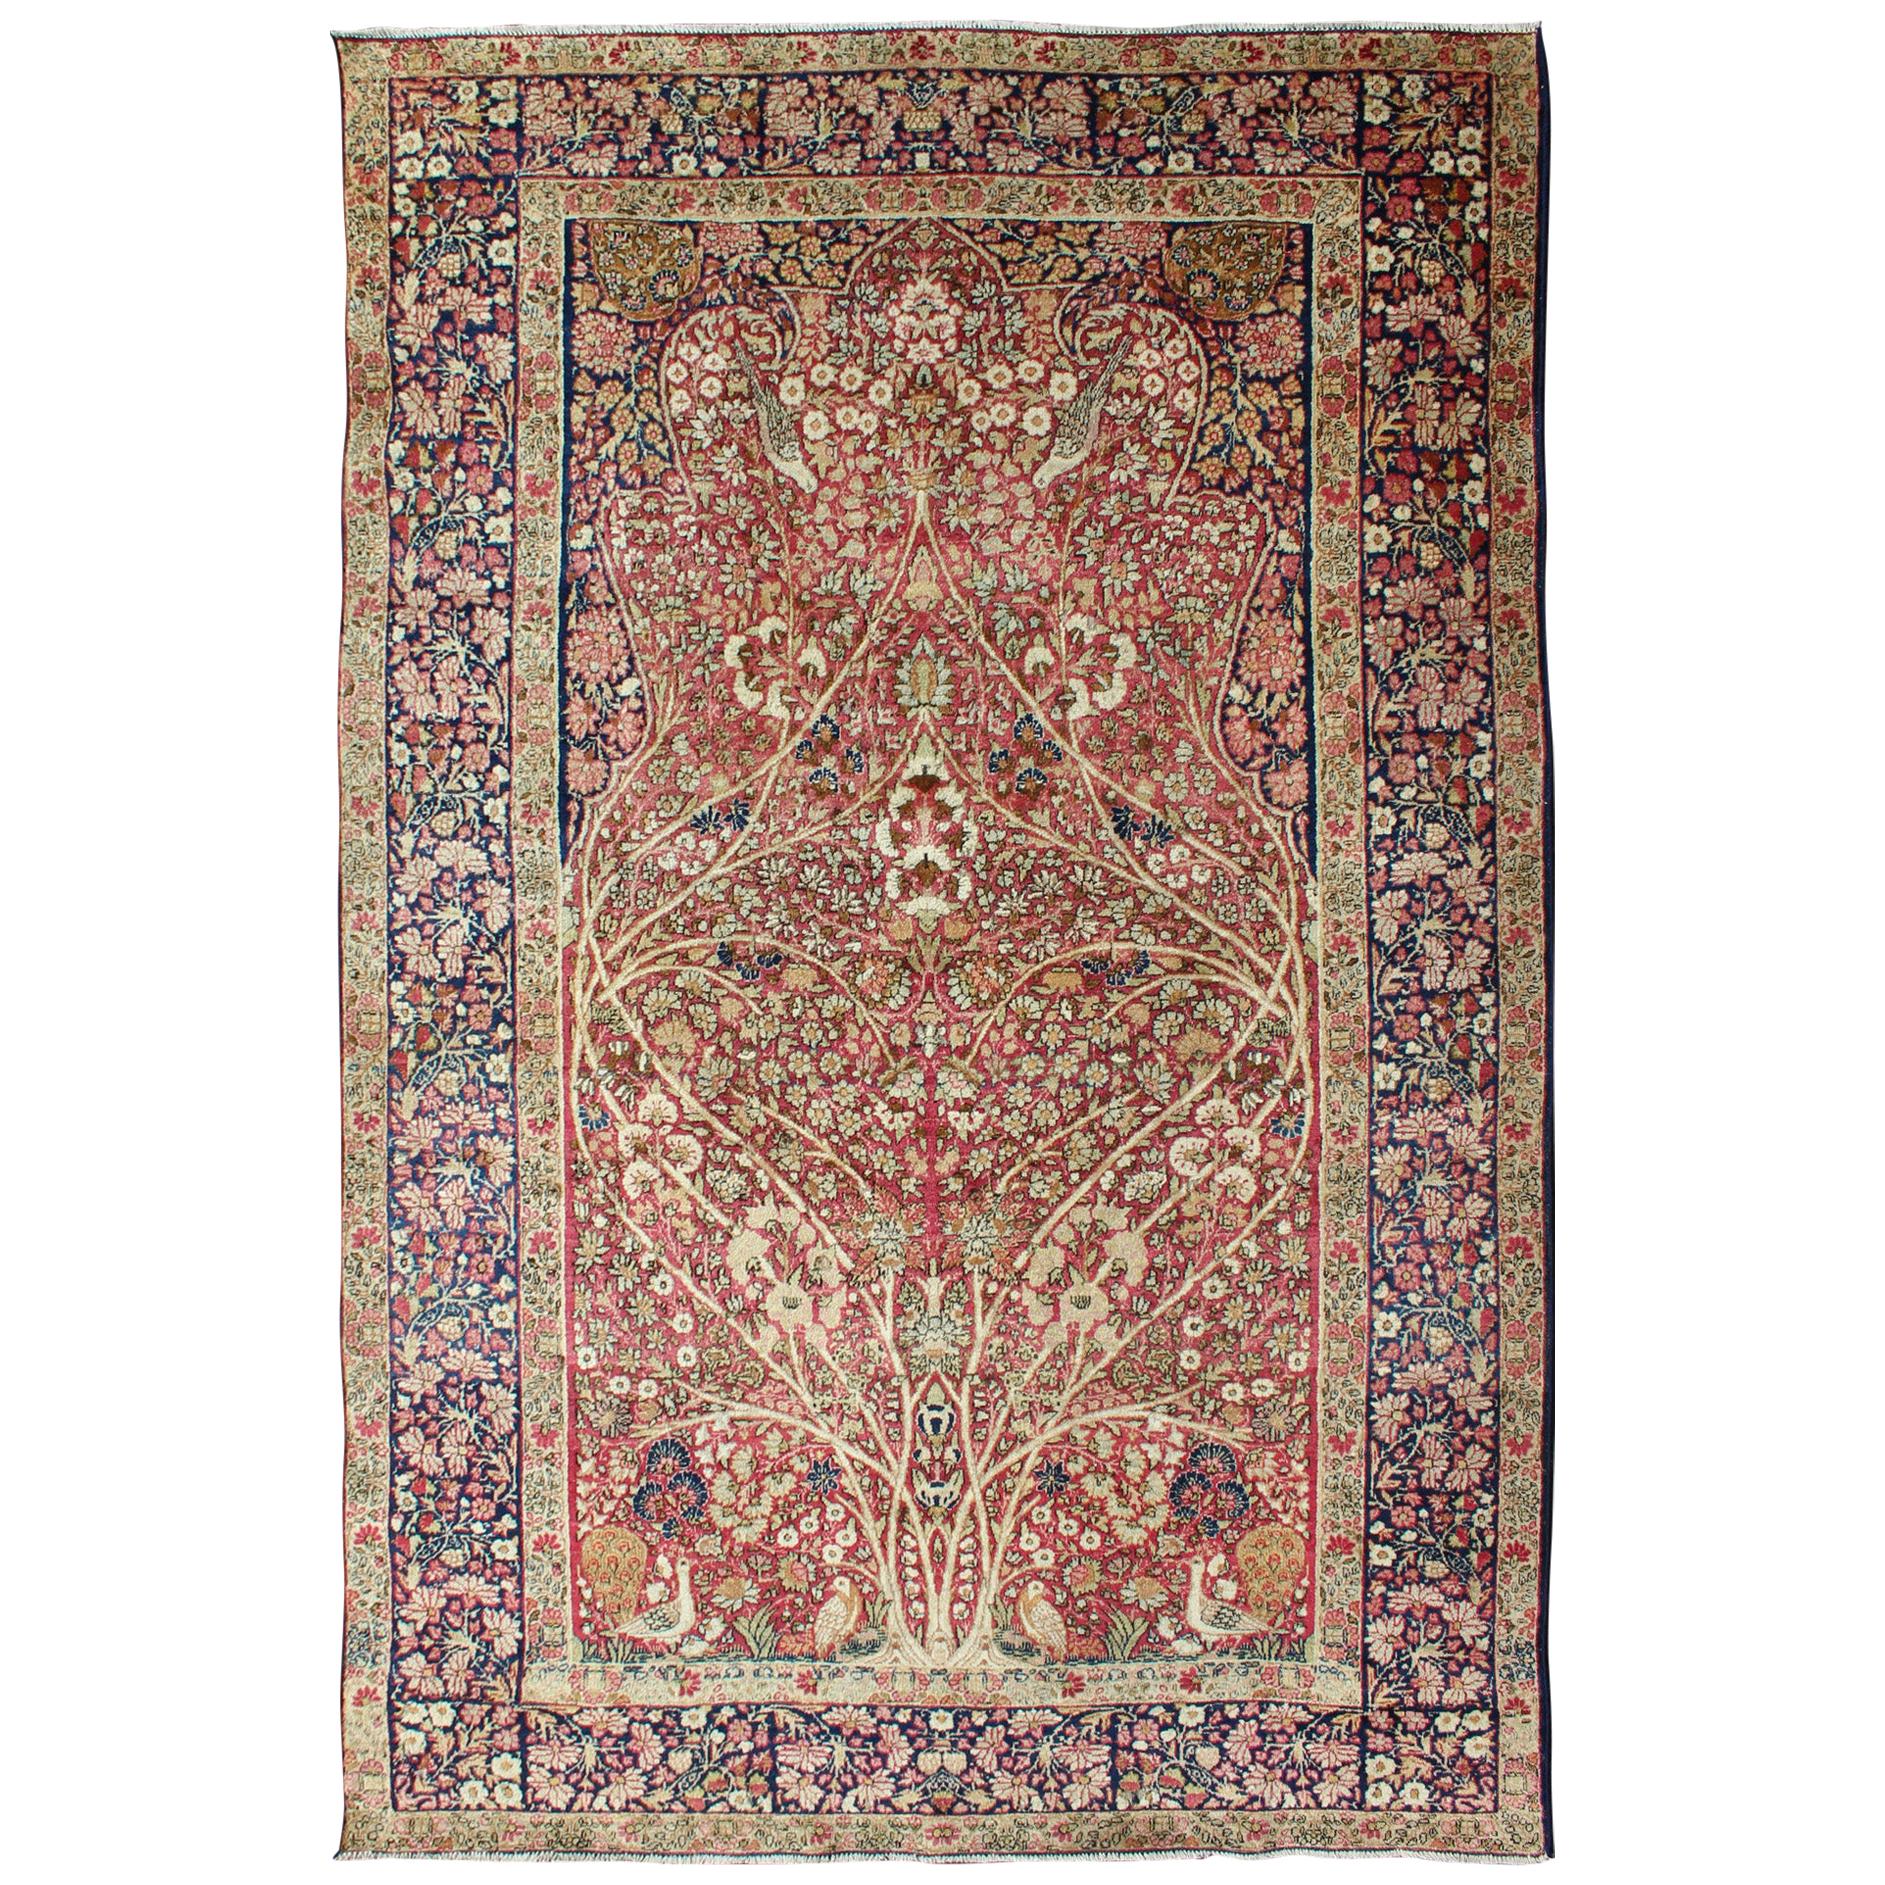 Very Fine Antique Persian Lavar Kerman Rug with Intricate Floral Design  For Sale